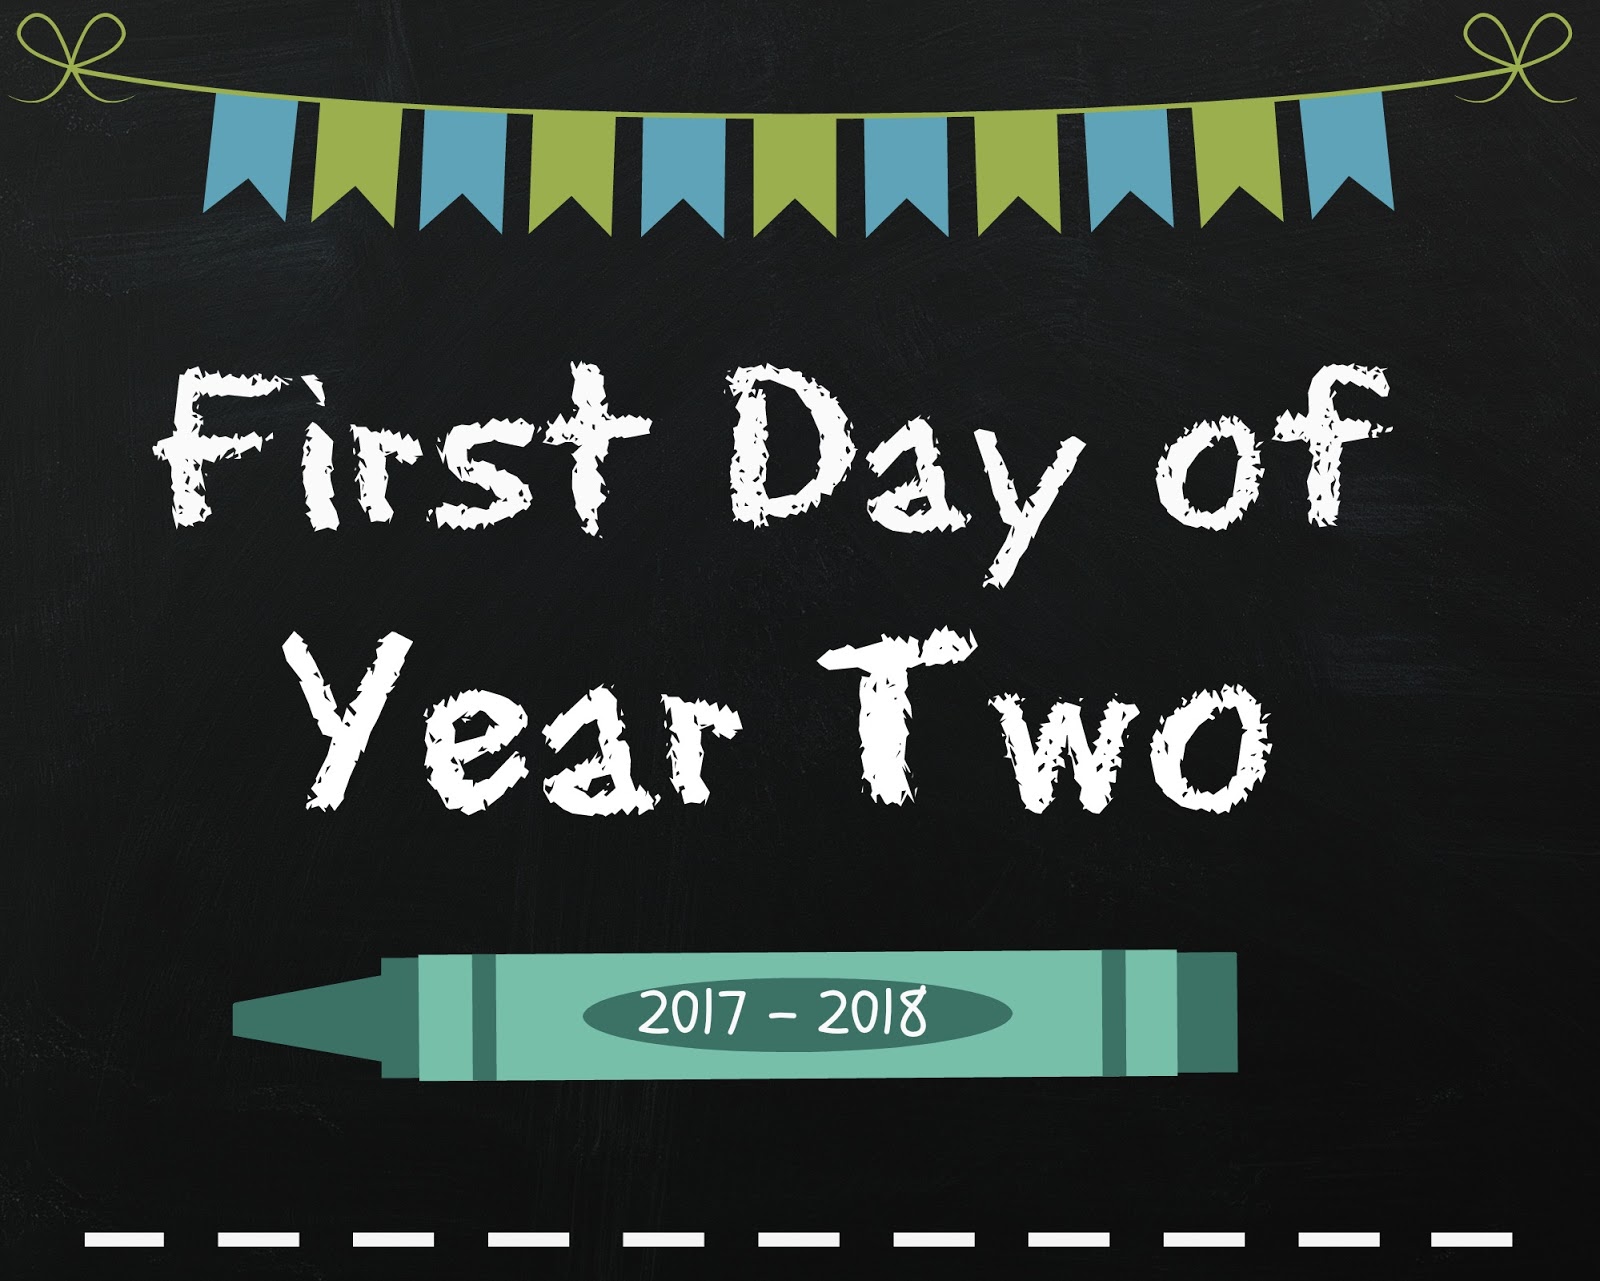 First Day of School Chalkboard Signs Play and Learn Every Day